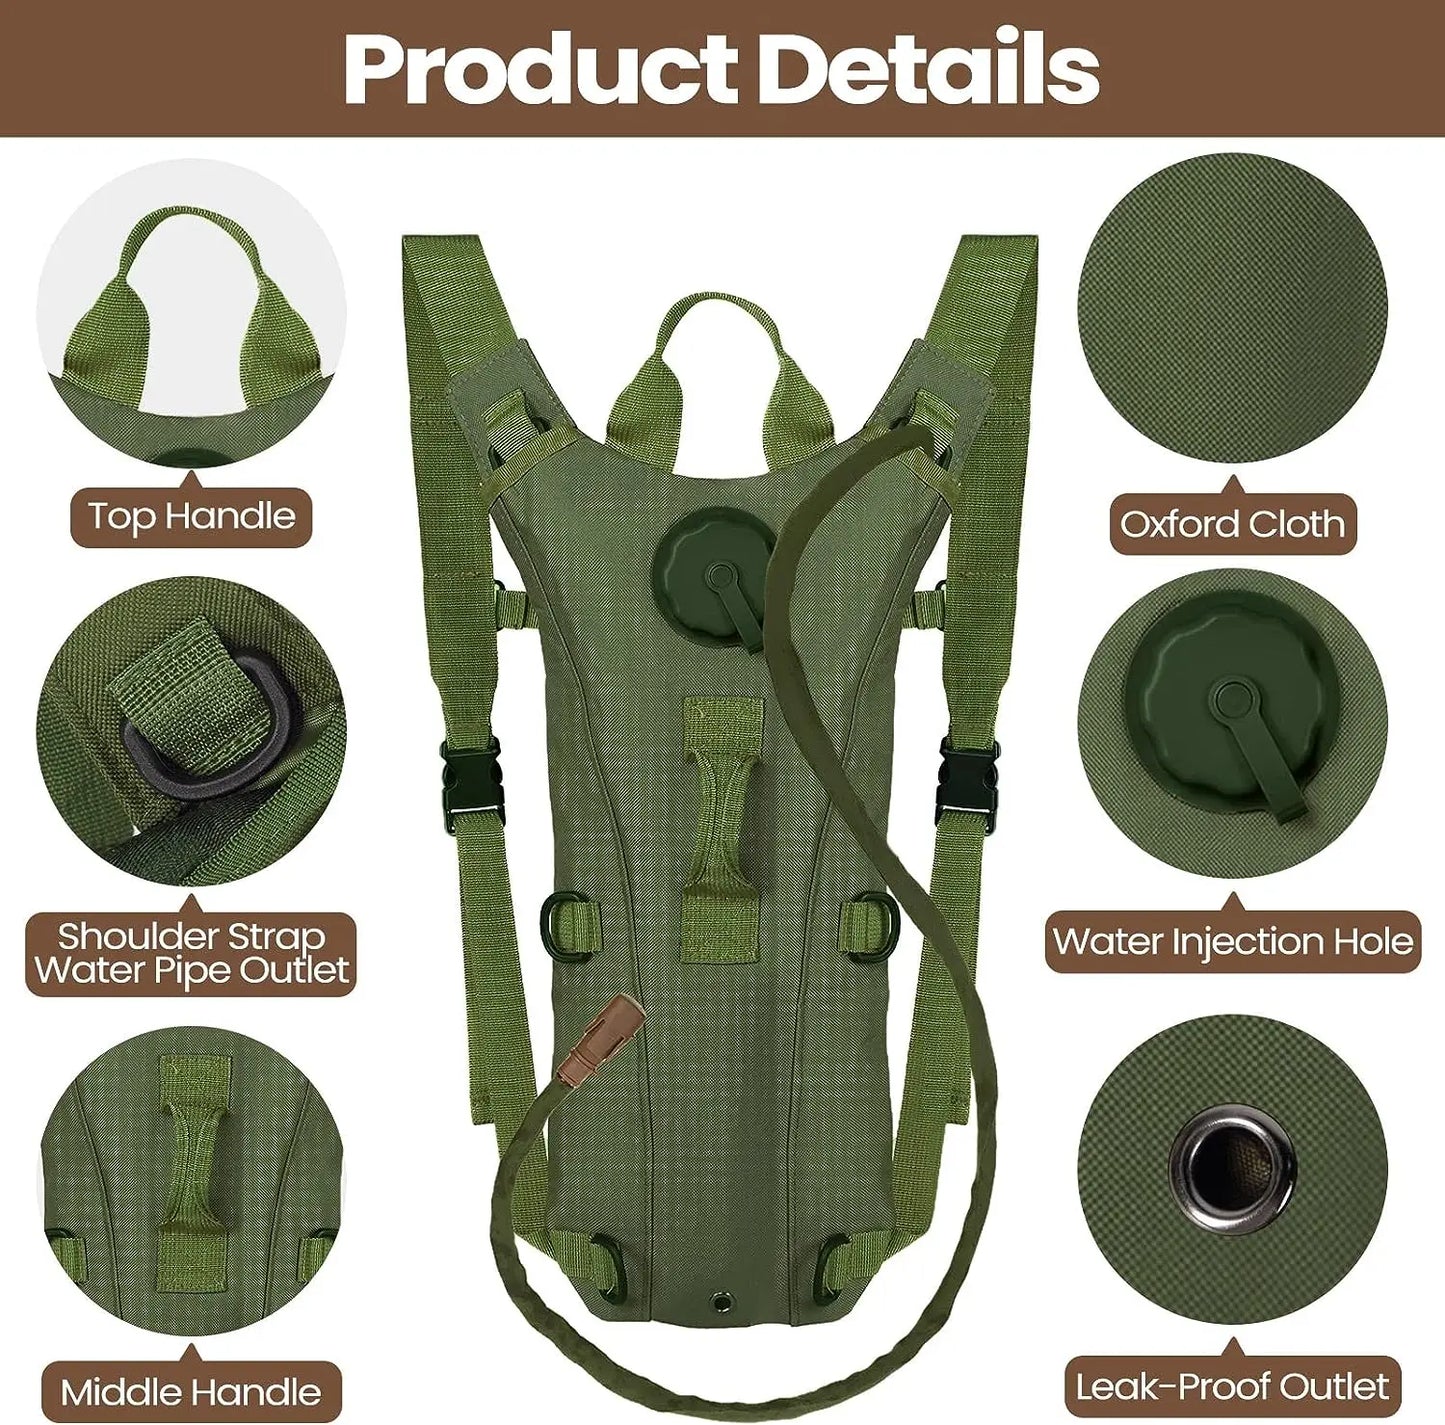 9-camp ® Tactical Hydration Pack